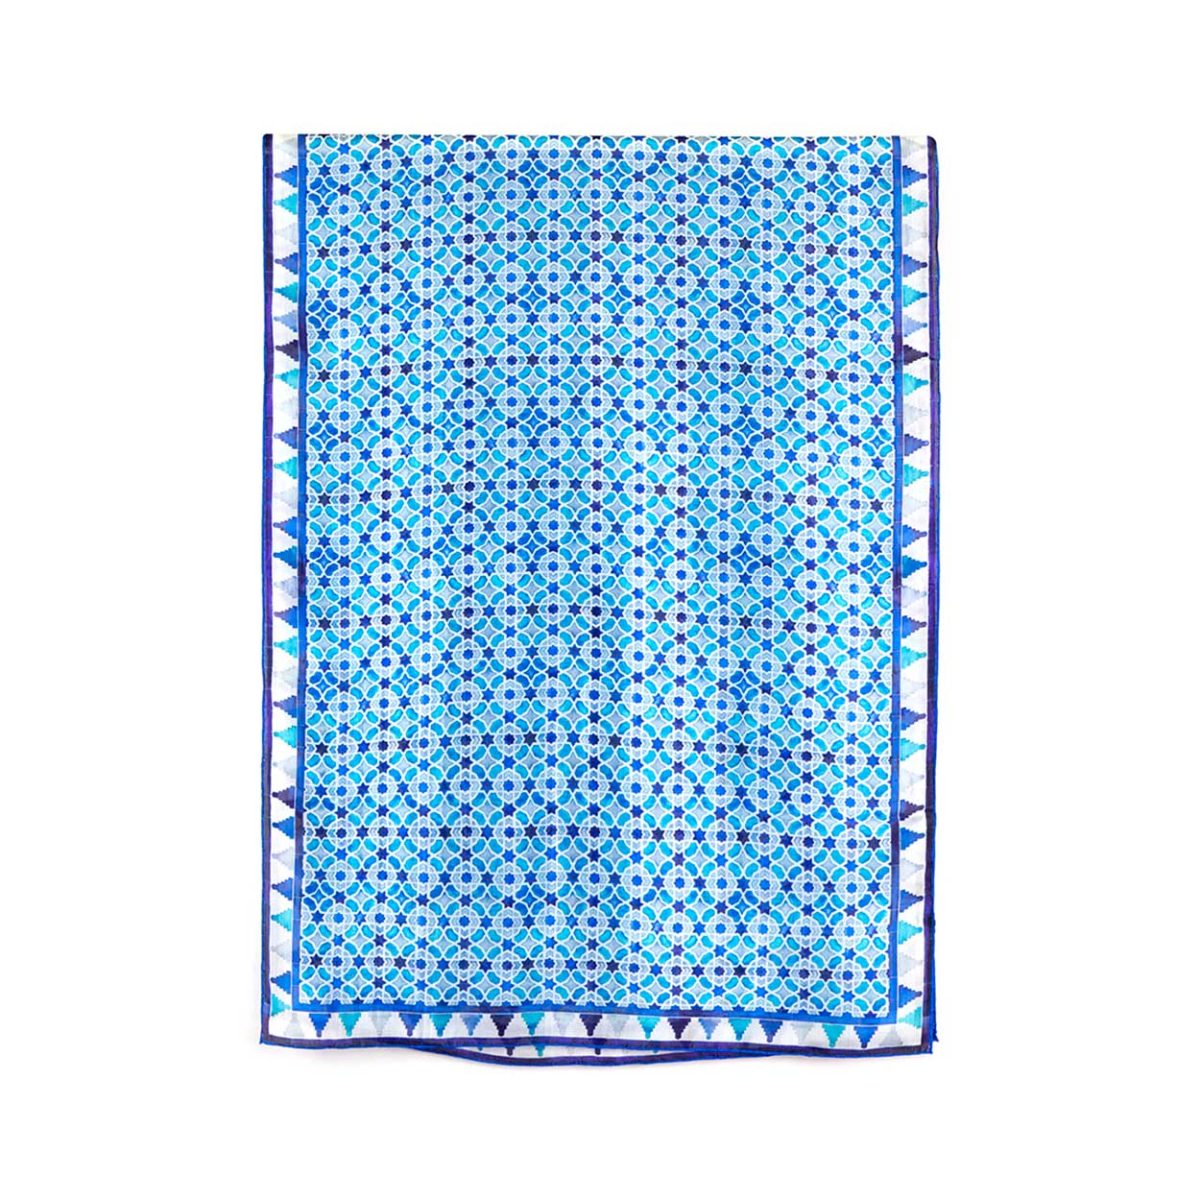 Large white and blue silk scarf for women